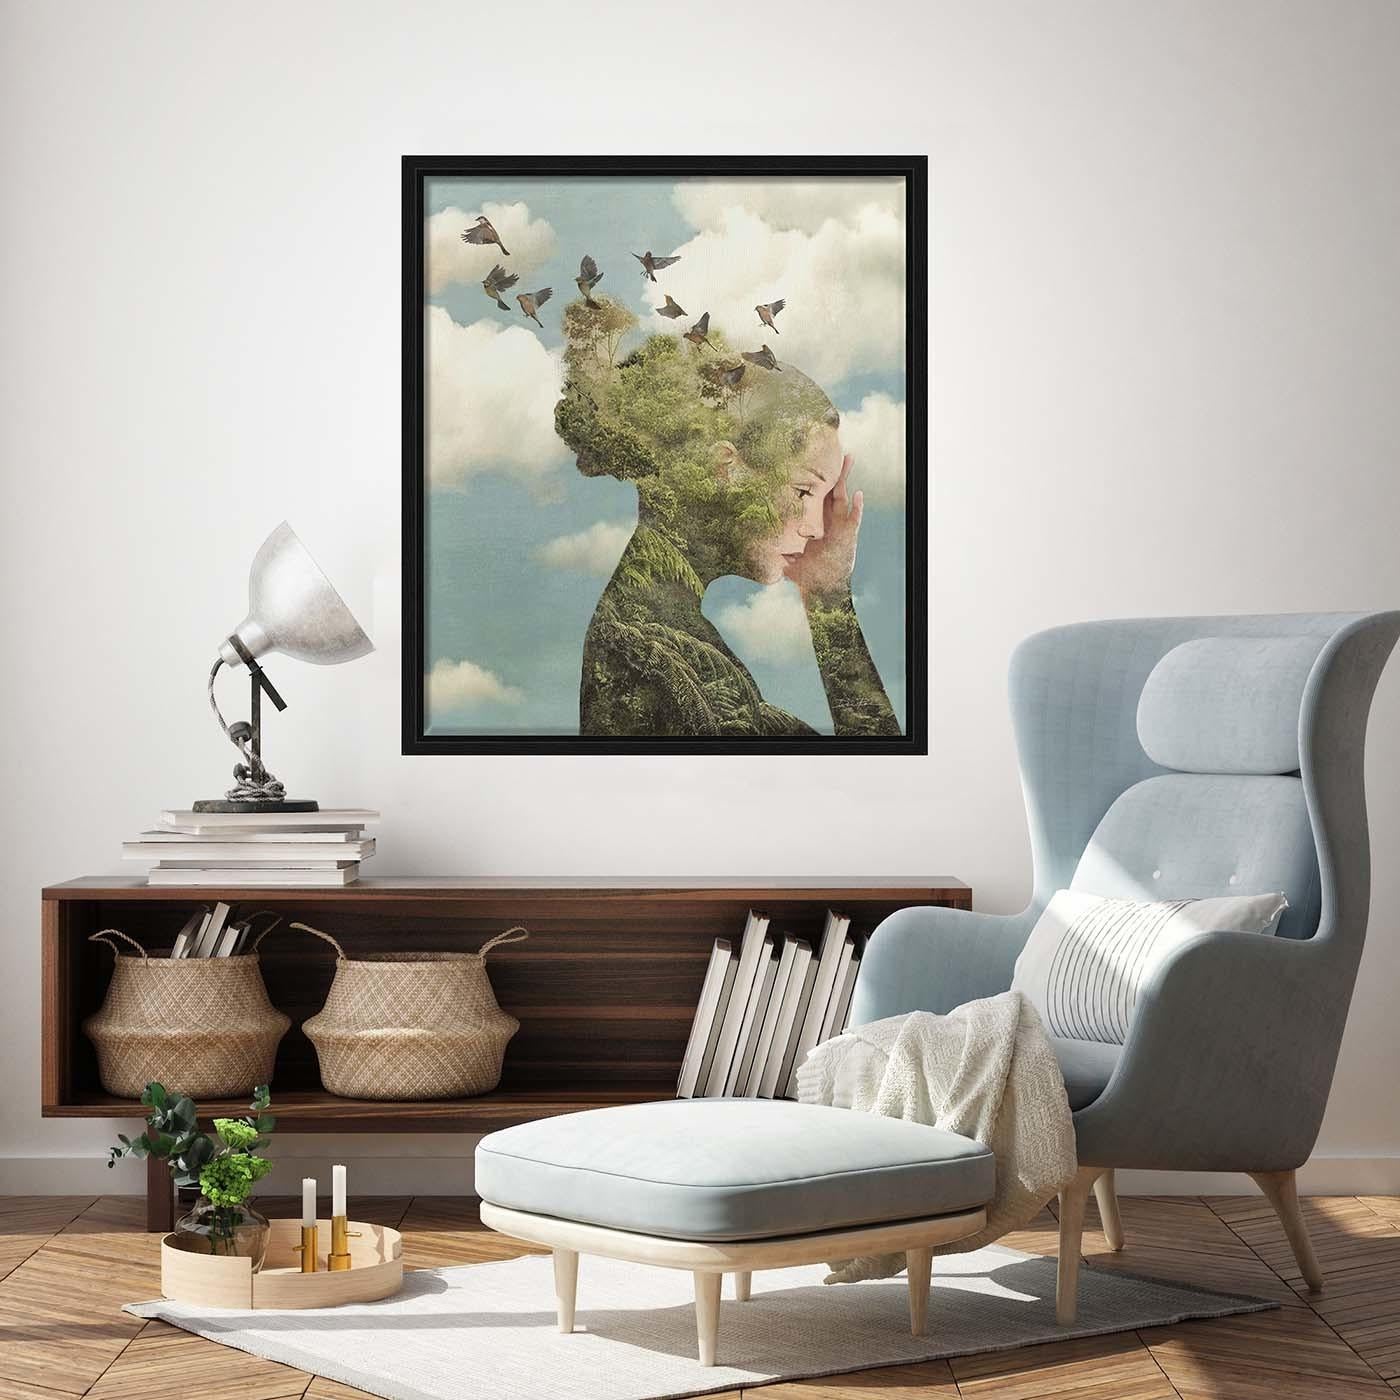 This work celebrates the artist's dreamlike Pop Surrealism. It portrays a woman protected by the green cloak of Mother Nature. She is lost in imaginative thought, which soars to the heavens like a flock of birds. Limited Edition digital painting,